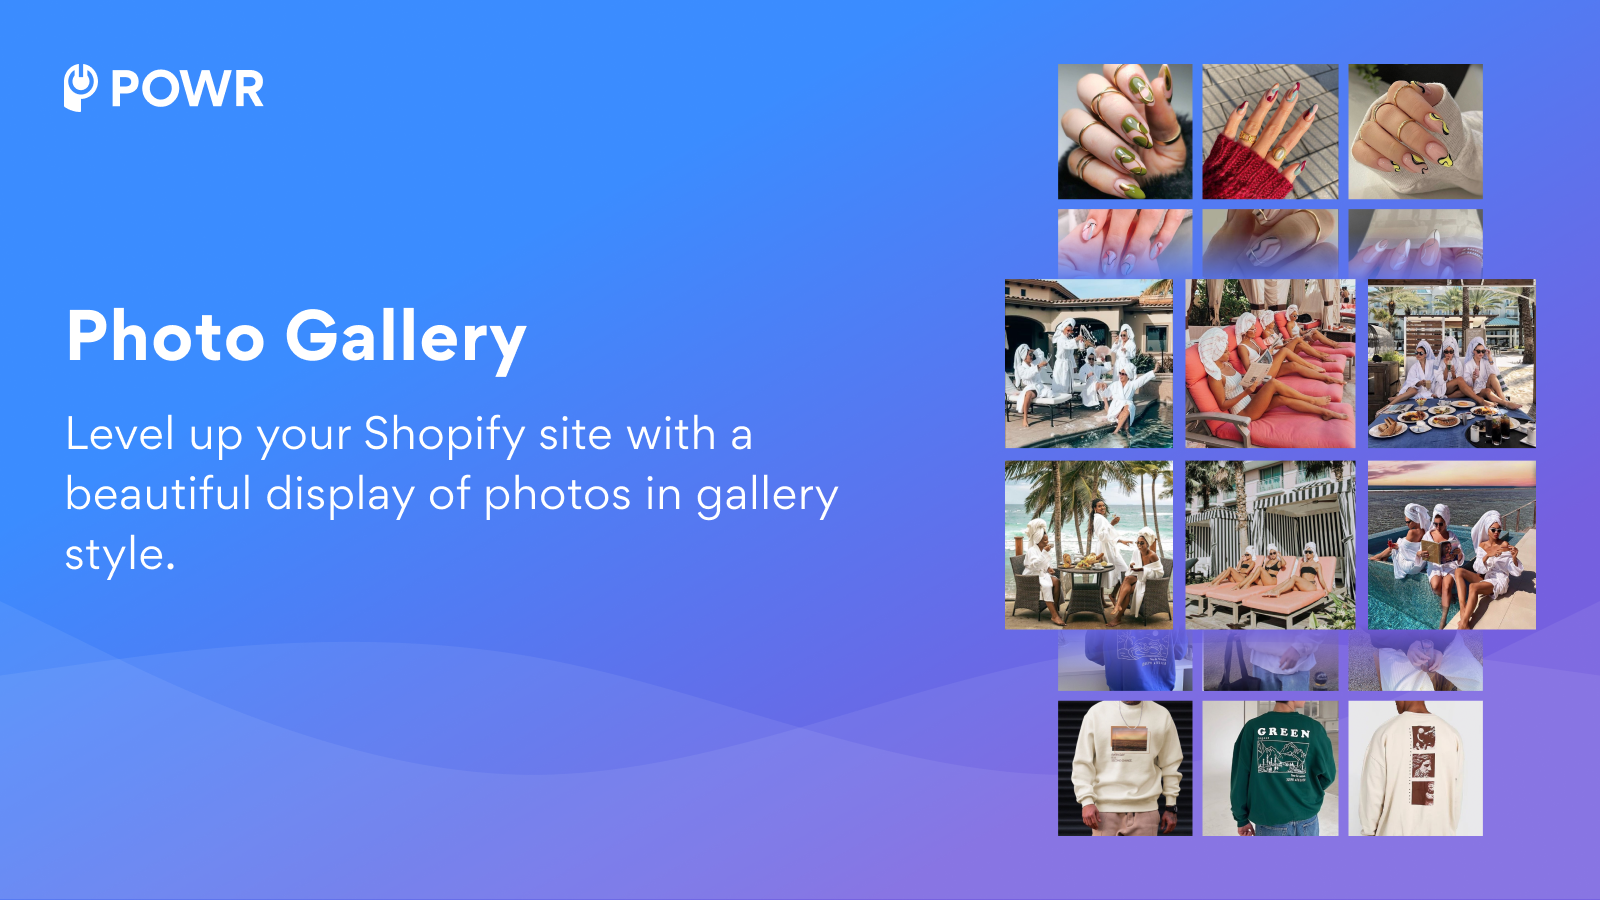 Level up your Shopify site with a beautiful display of photos in